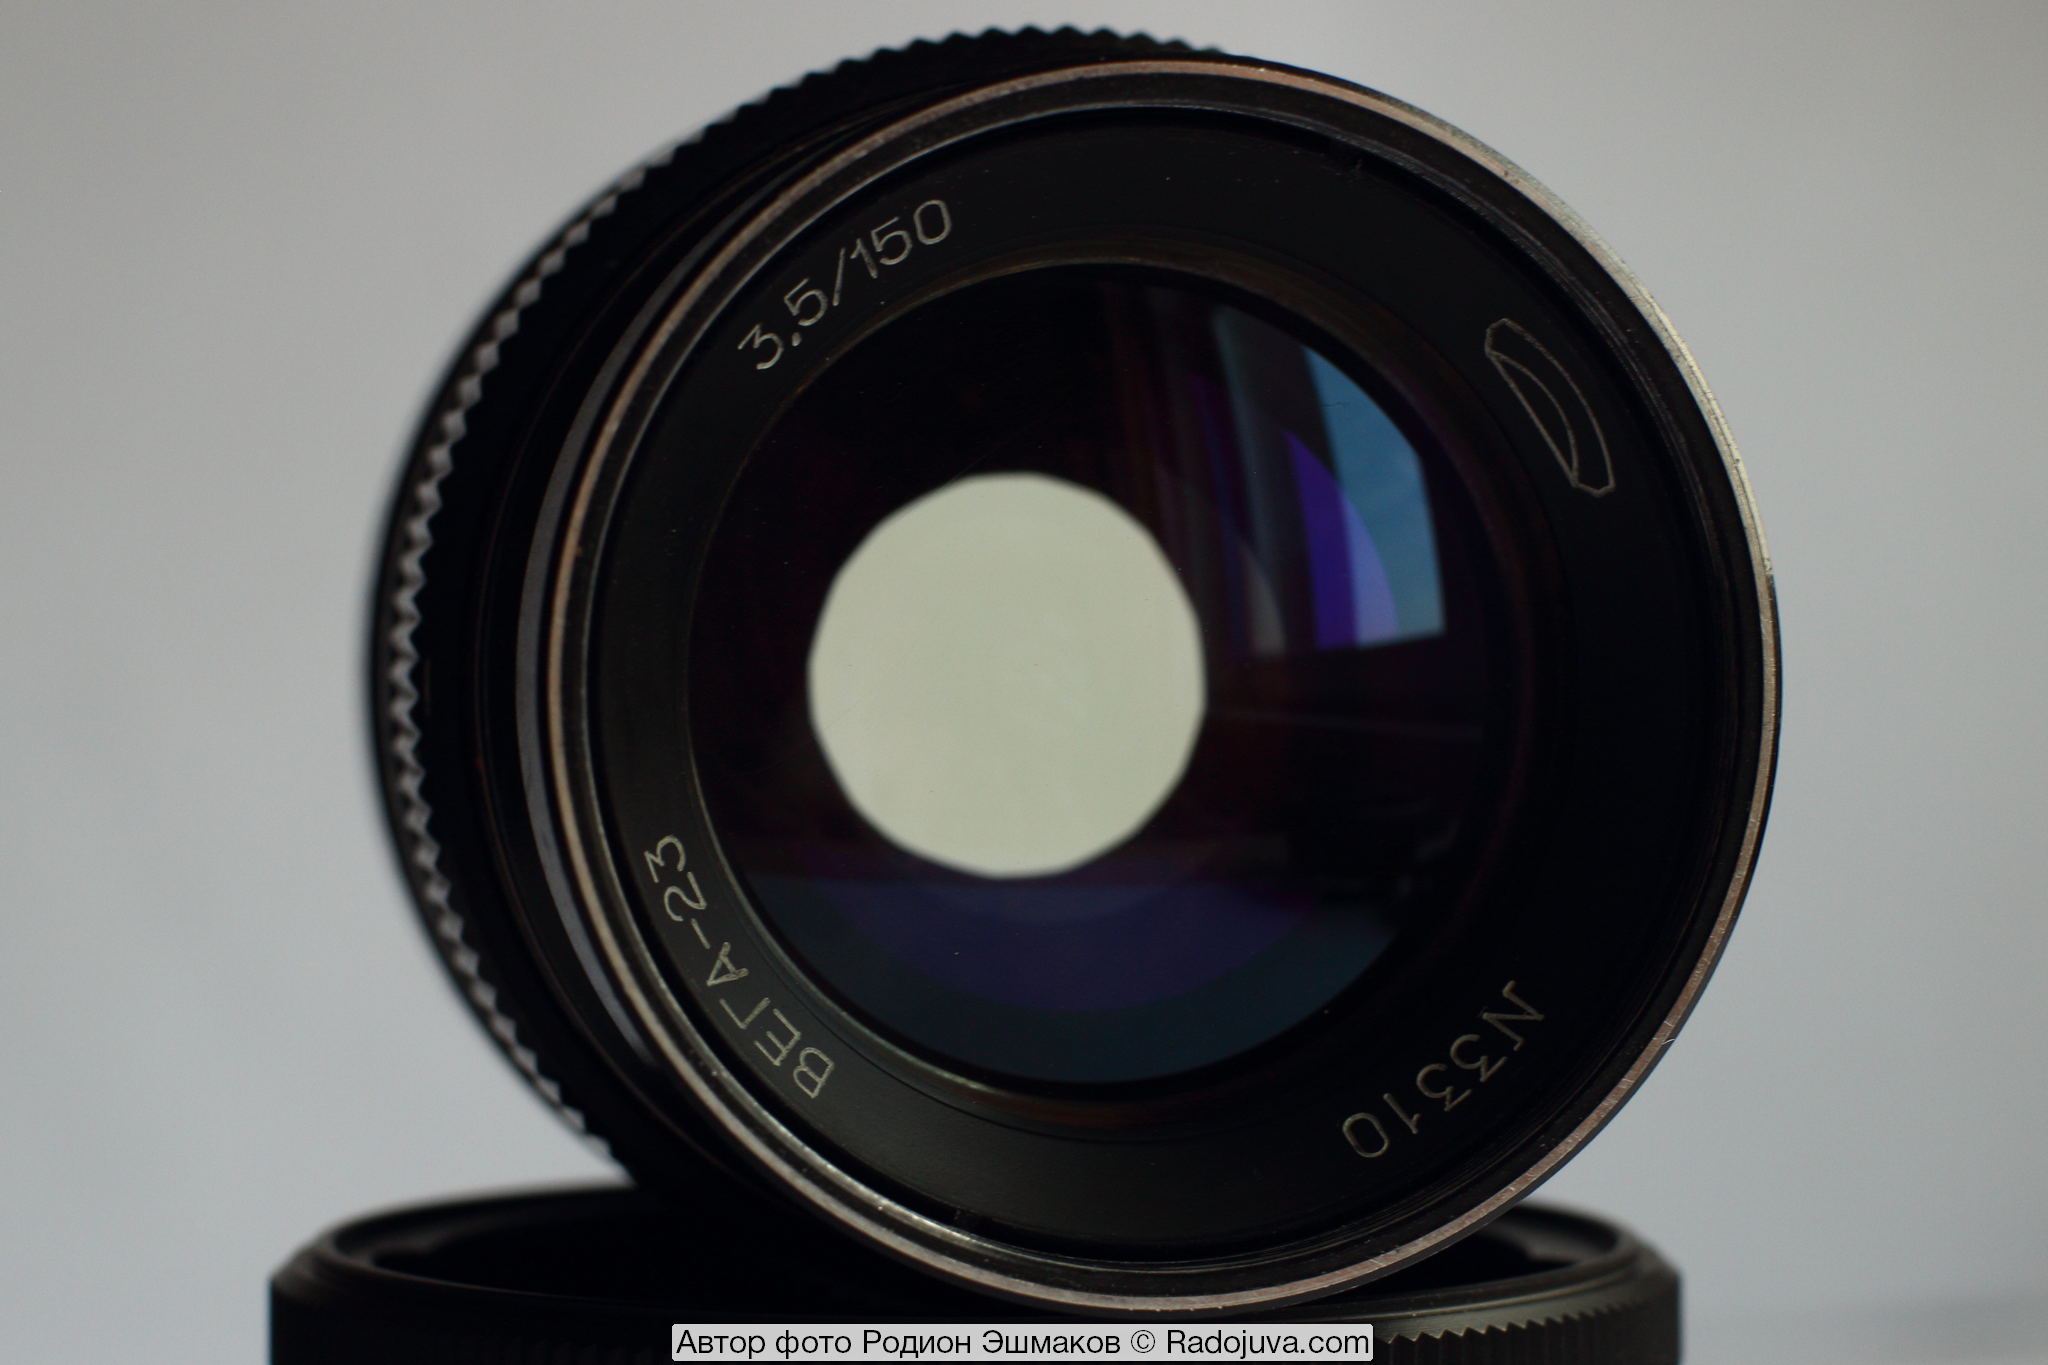 View of the lens with a covered aperture in the light. The yellowness of the glass is noticeable.